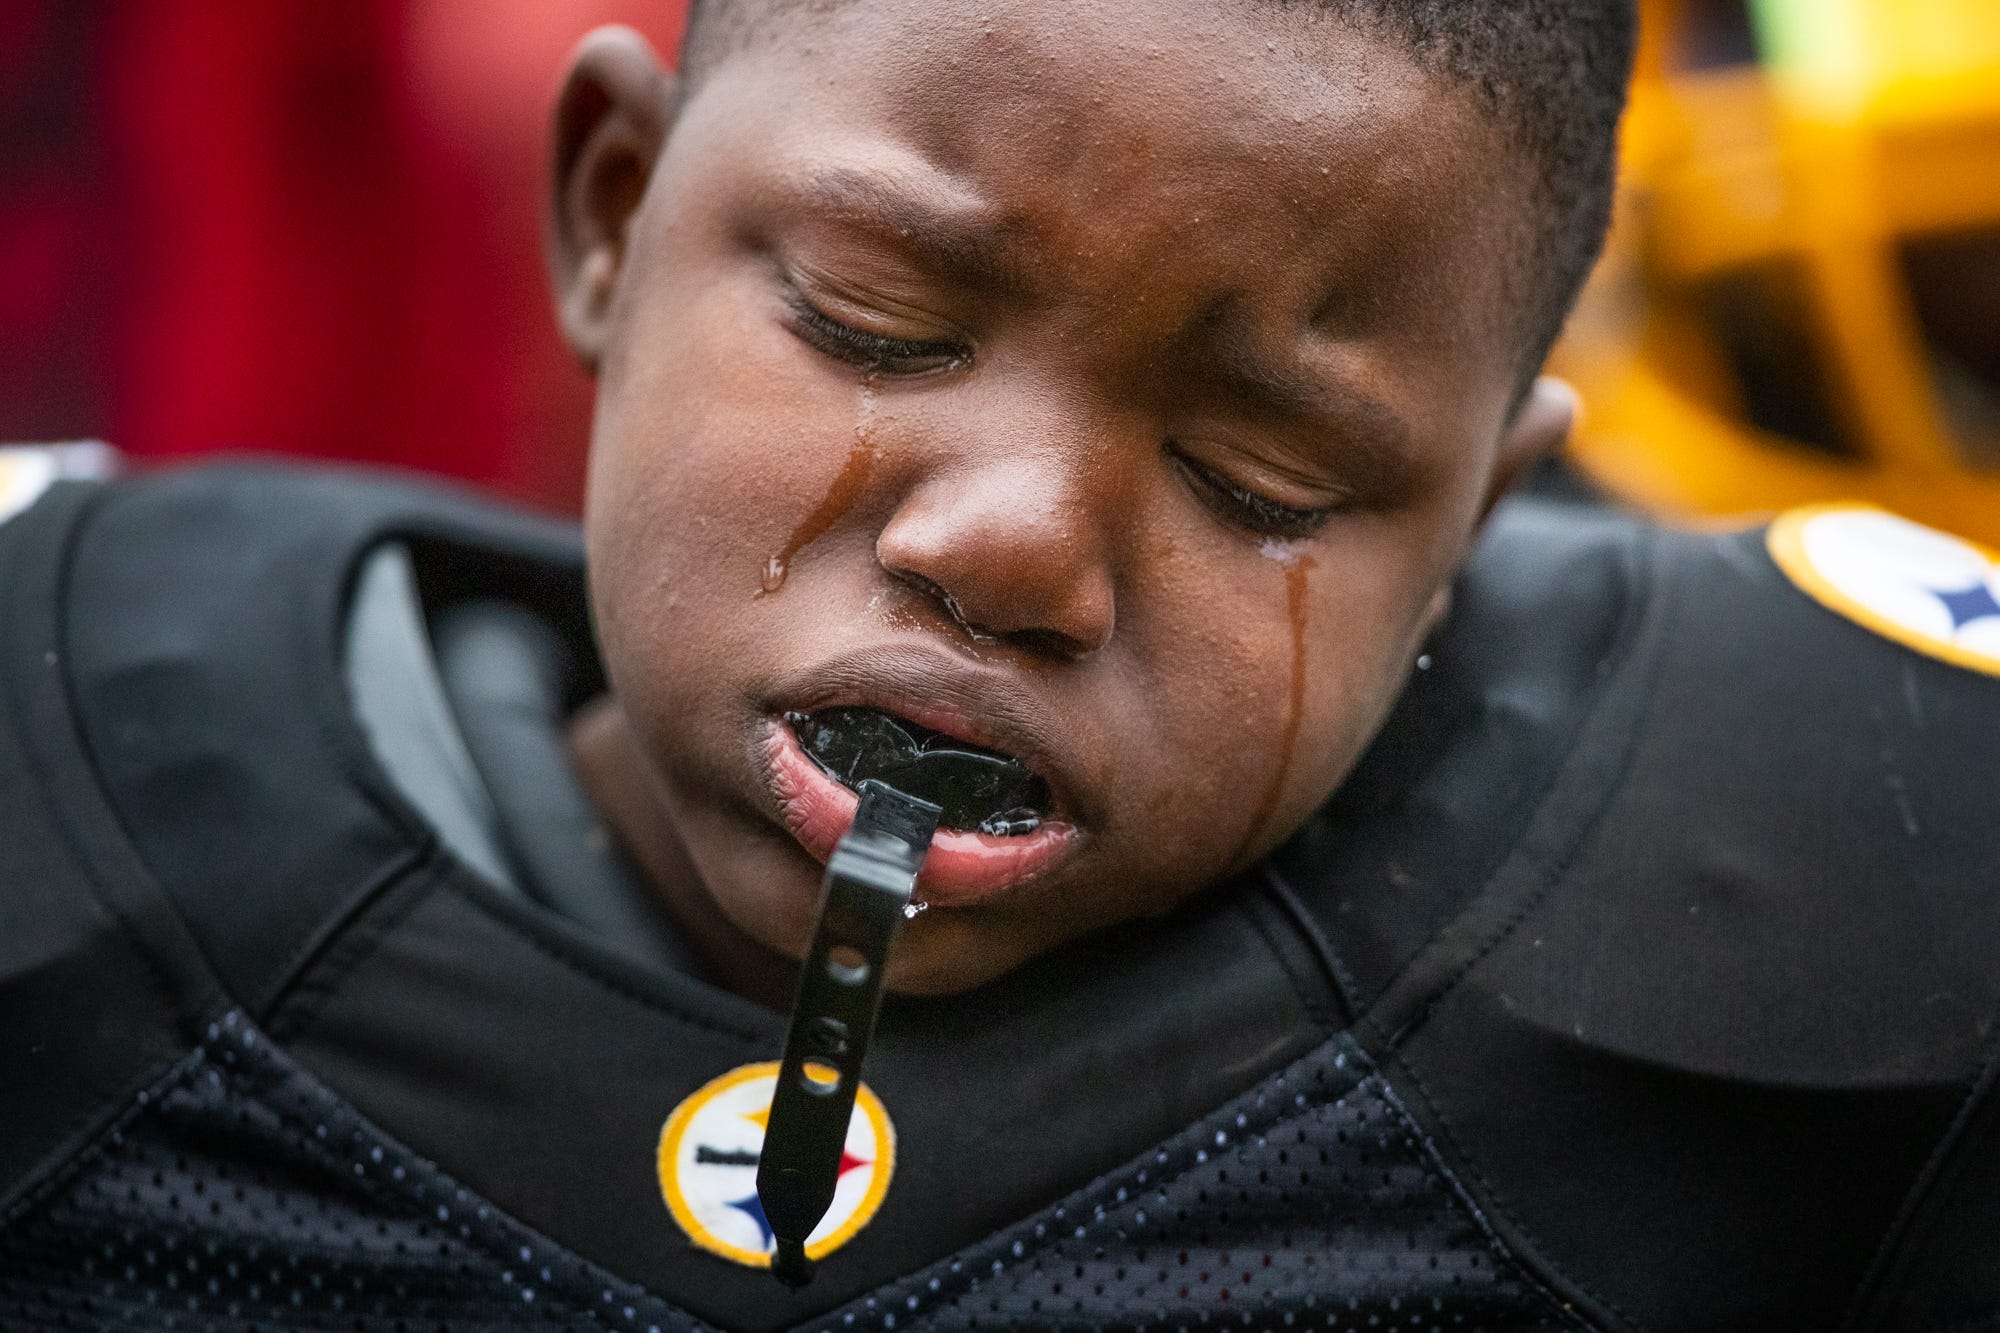 Tyson Delaney, 8, cries after the Indy Steelers' 8u team's overtime loss in the championship game against the City Colts on Saturday, Oct. 28, 2018. "You played your hearts out, keep those heads up," said coach Donnell Hamilton. The game was moved from Arsenal Tech High School to Frederick Douglass Park due to a fight between parents where gunshots were fired. The team will continue on in the spring with a new season. Hamilton started the Indy Steelers in 2005 with the aim to keep kids in the Butler-Tarkington neighborhood on a positive path. Hamilton, who graduated from Broad Ripple High School, lost his full-ride college scholarship to Western Kentucky after getting caught up in an incident with his friends where guns were in the car. Hamilton, who was coming into his junior year as a team captain, had to serve time in prison. He would not graduate. "I done been through what you been through. Your struggle is familiar for me," he said, relating to the kids on his team. "So, going through my struggle, getting out of my struggle and becoming more positive in my life, that's what turned me into what I am today. A beautiful struggle."